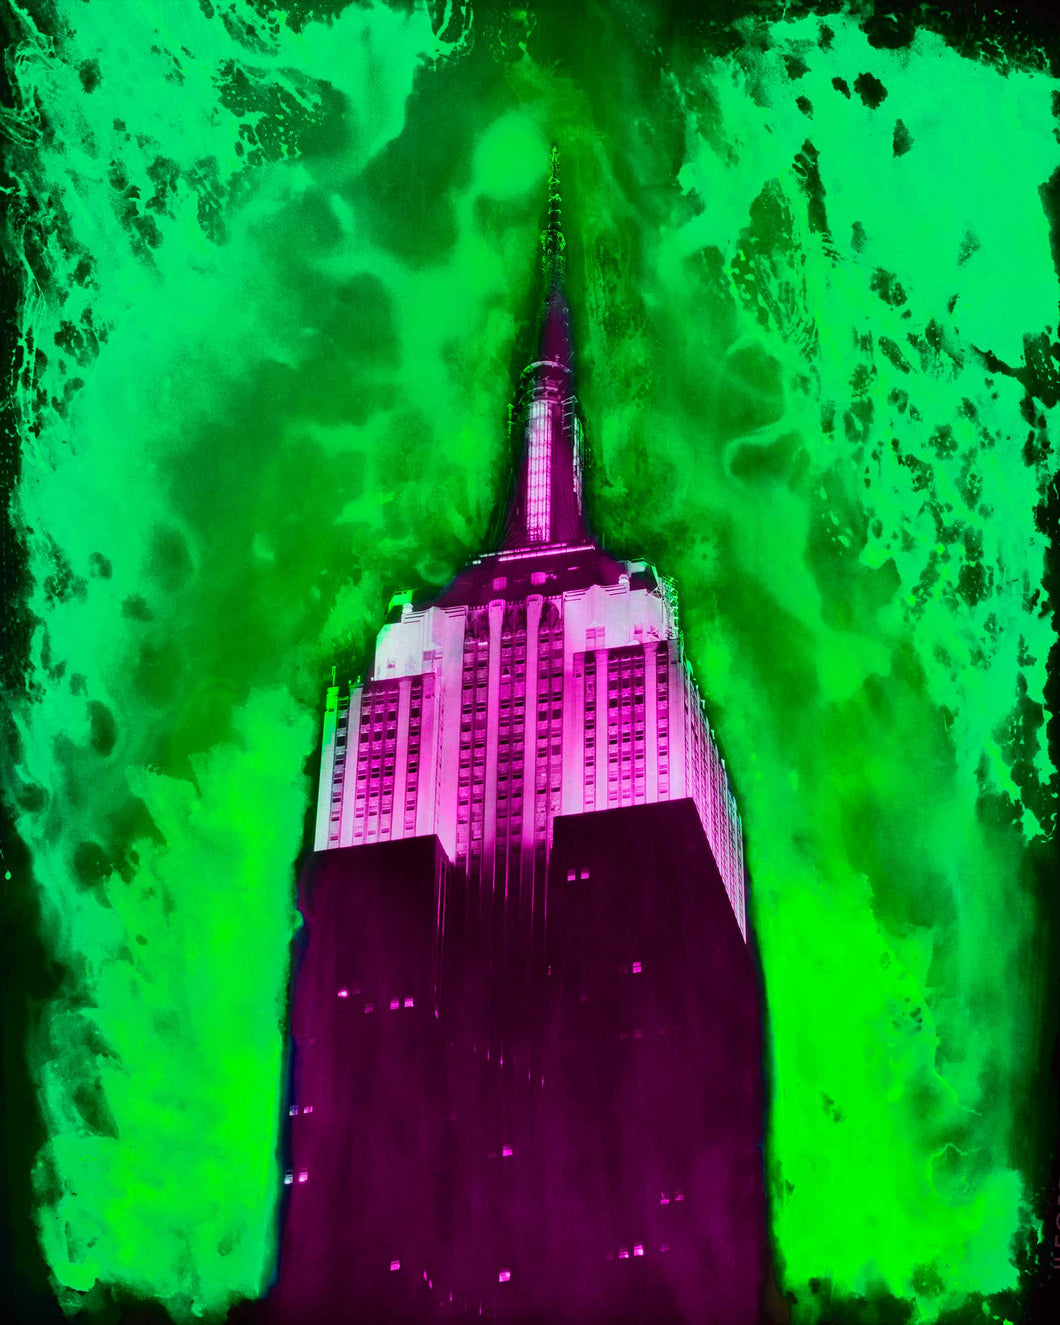 Empire state building pop art mixed media photo with paint splashes and intense colors